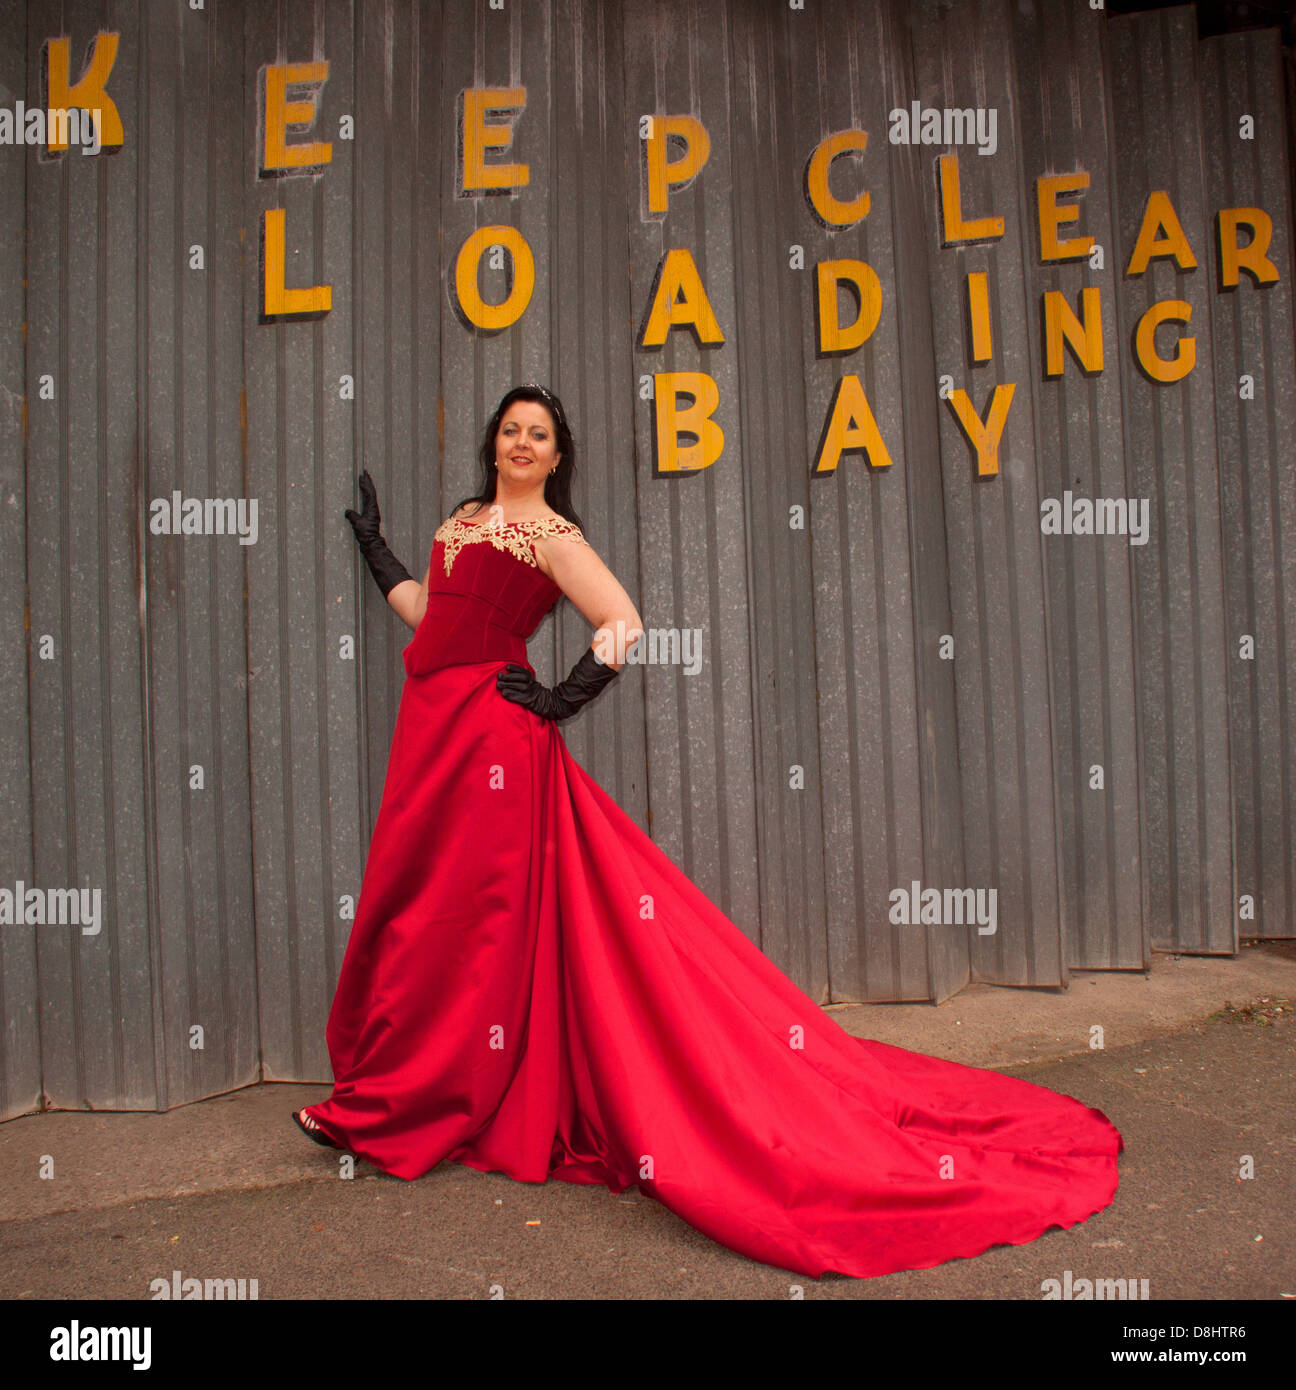 Woman in red dress in front of Keep Clear Loading Bay sign Stock Photo